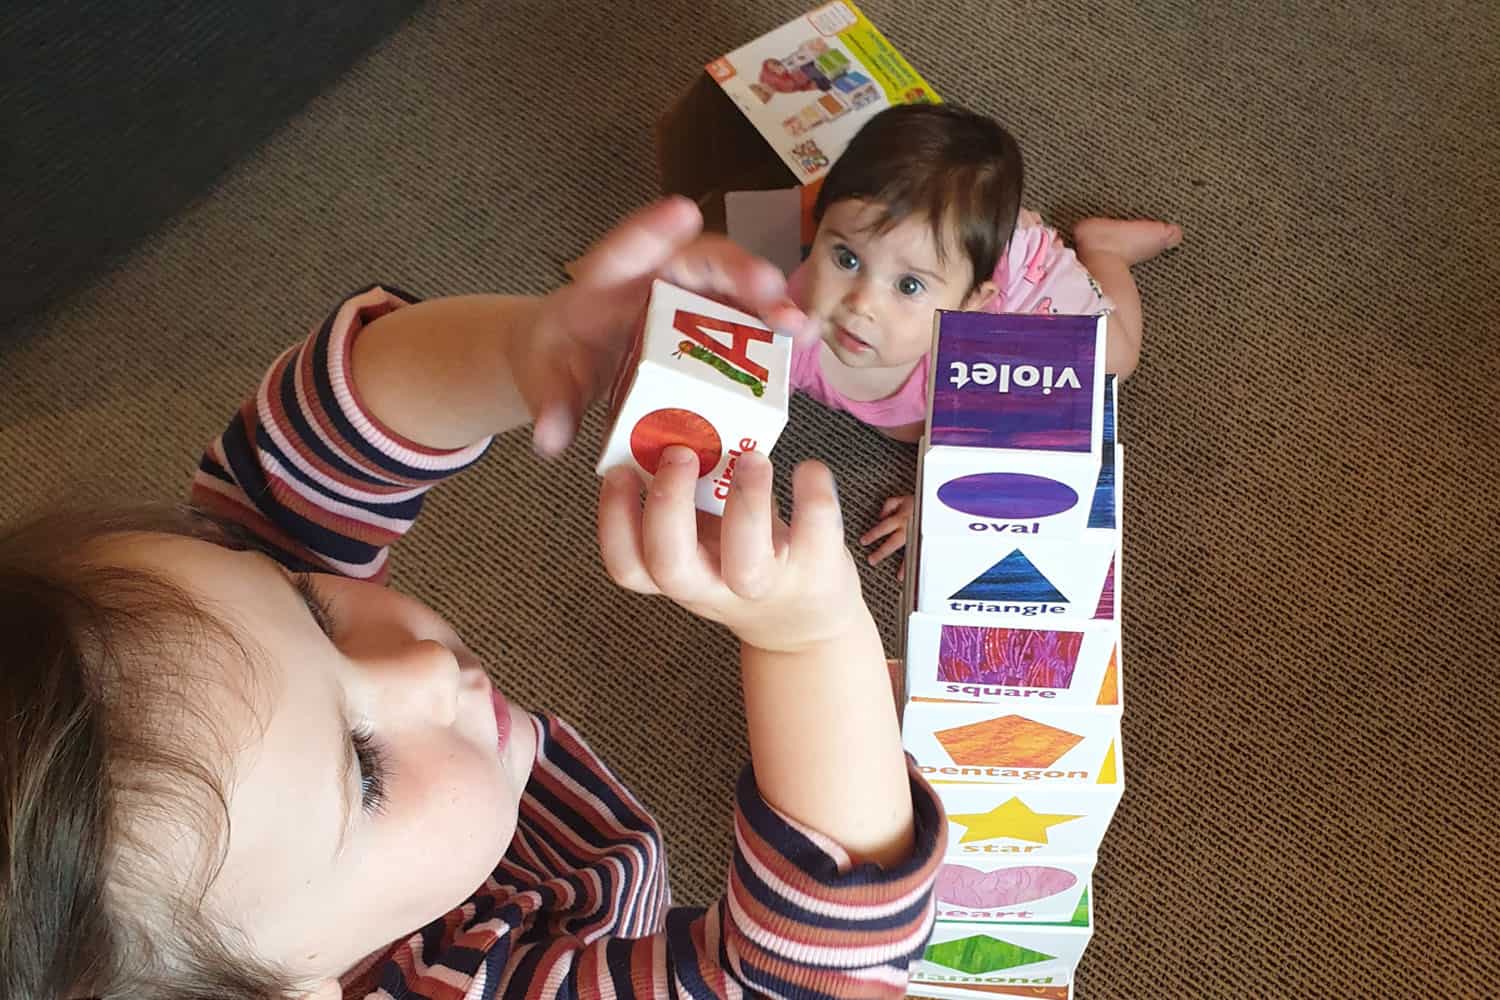 Young toddler with infant looking on, builds a tower of square blocks as tall as herself.